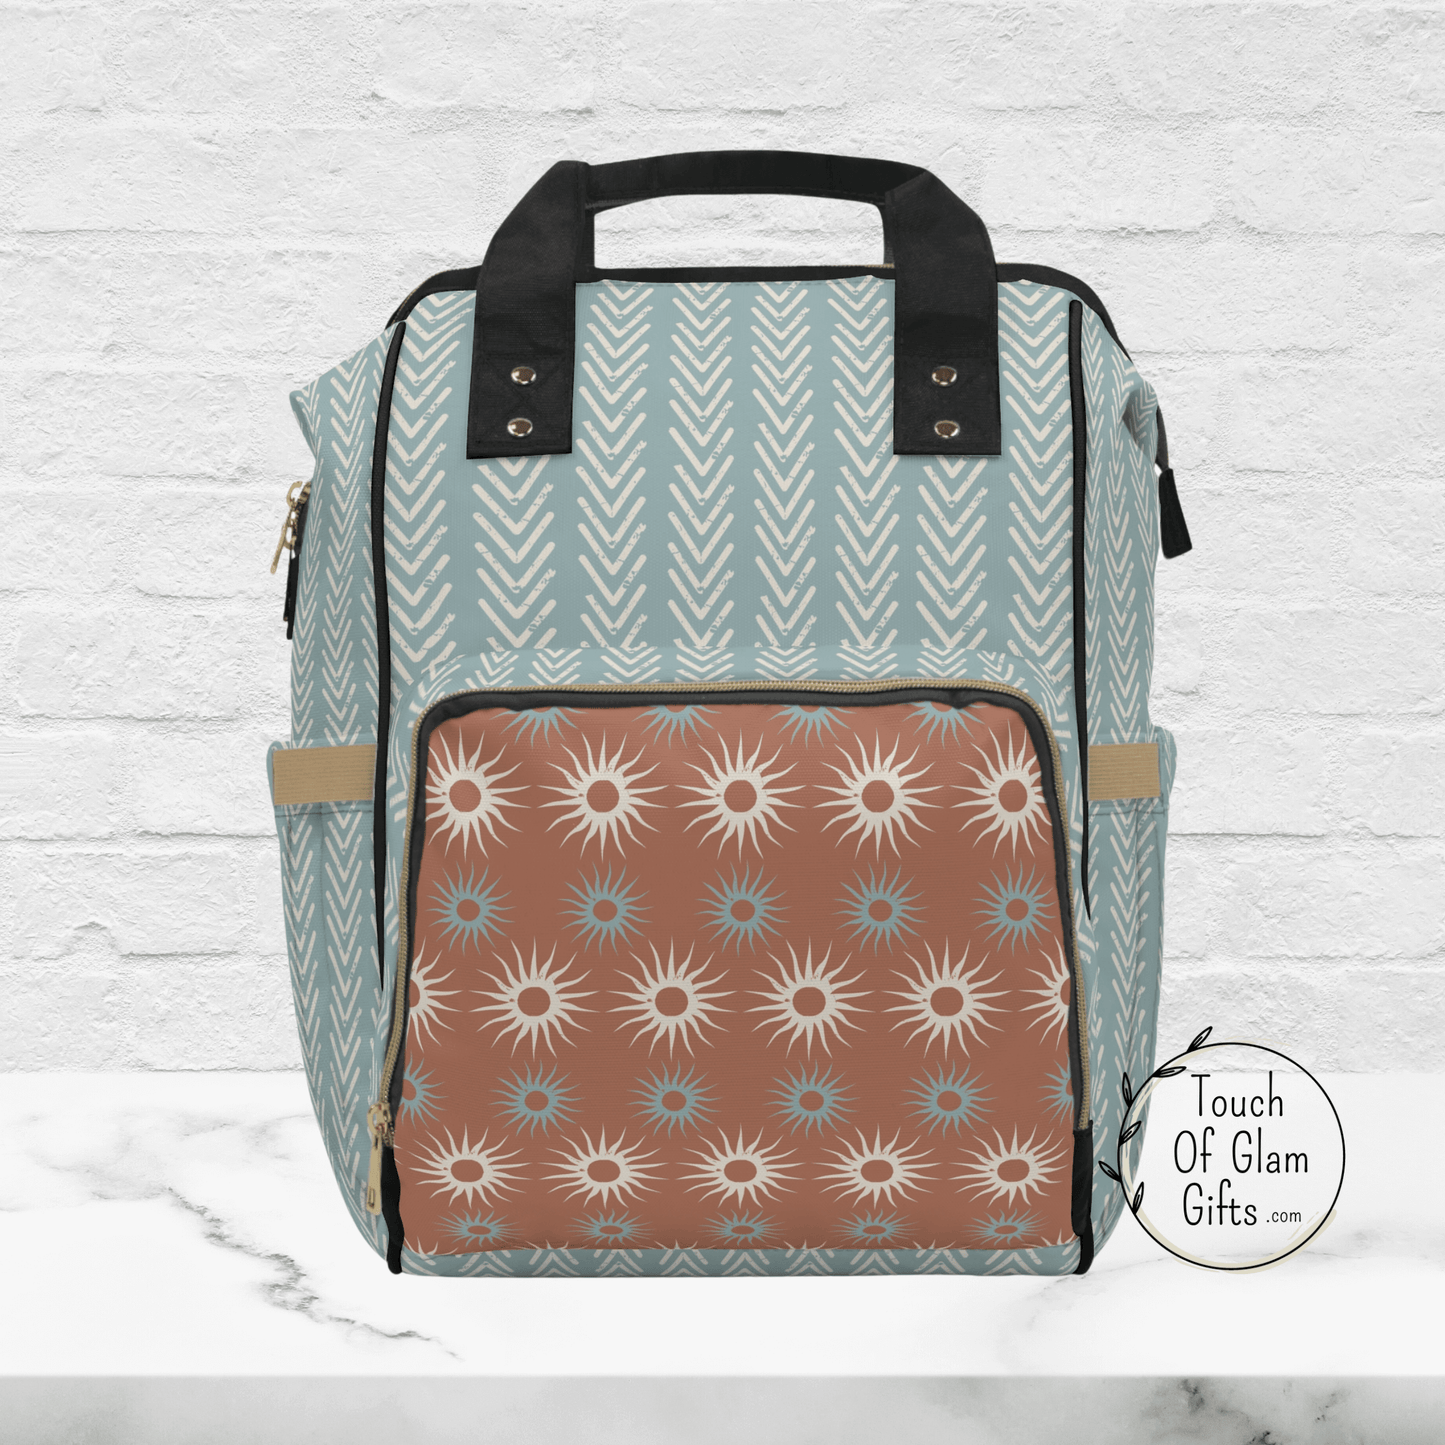 The boho diaper bag backpack is shown without the personalized monogramming. The boho sun designs on the exterior zippered pocket allows for more storage.